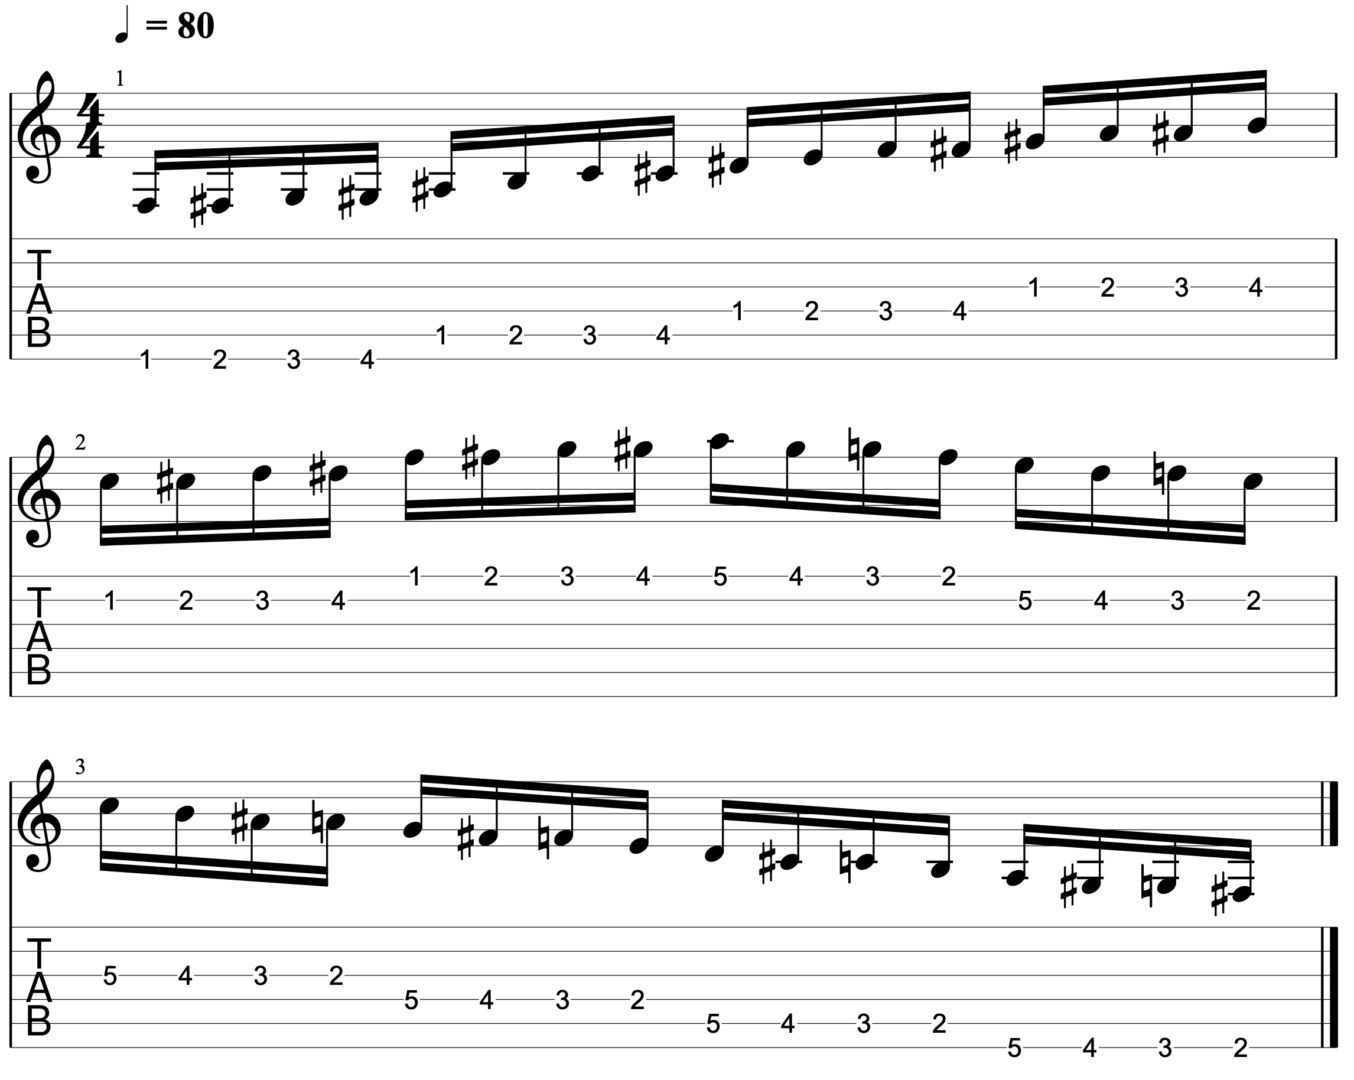 This is one of the foundational guitar exercises to help you play faster